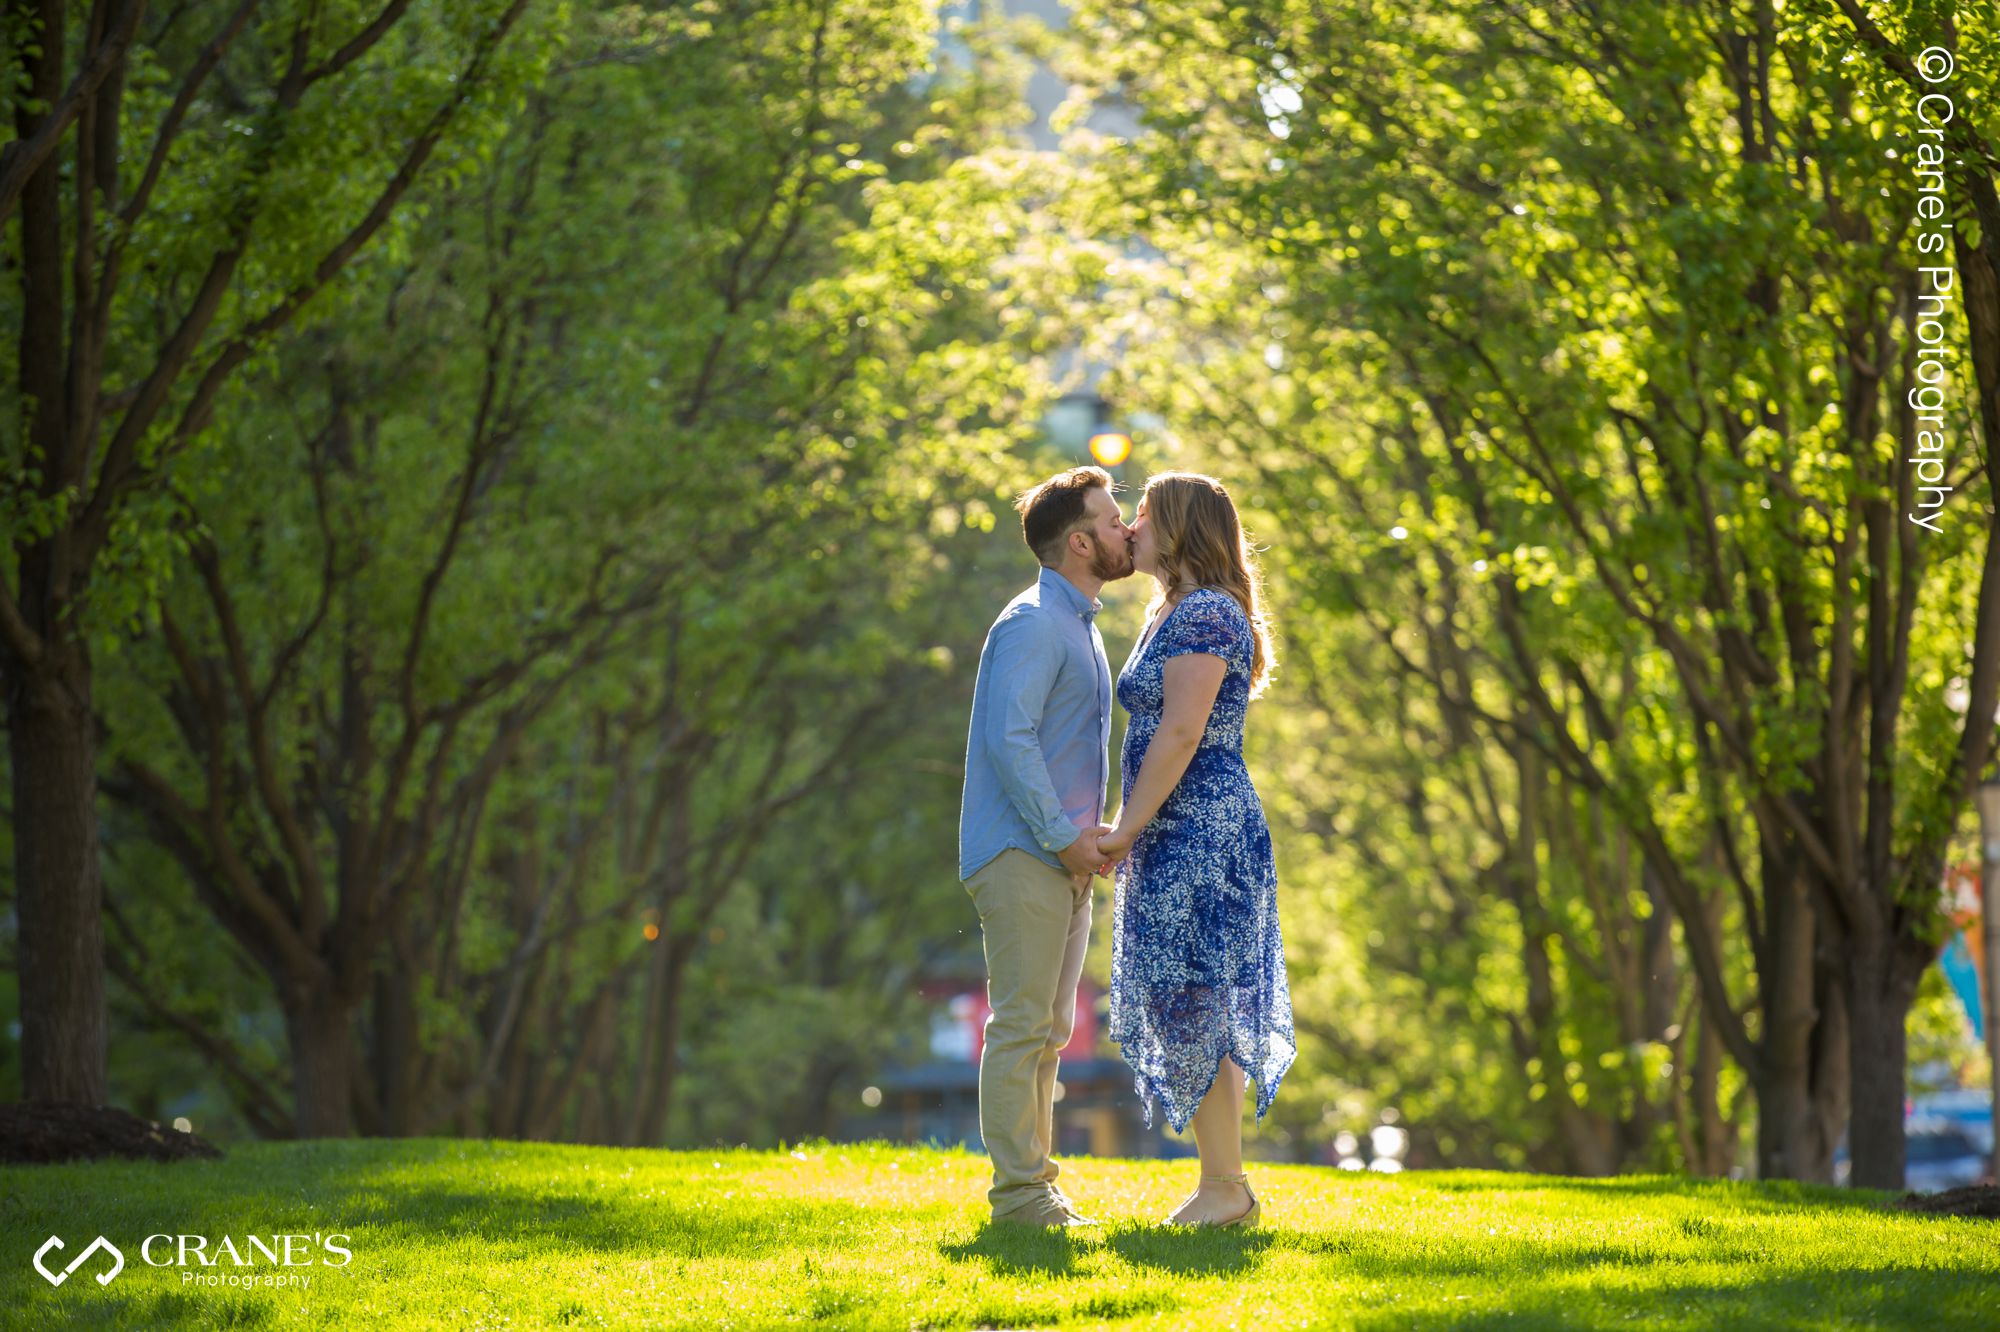 A couple kissing with a beautiful trees in the background